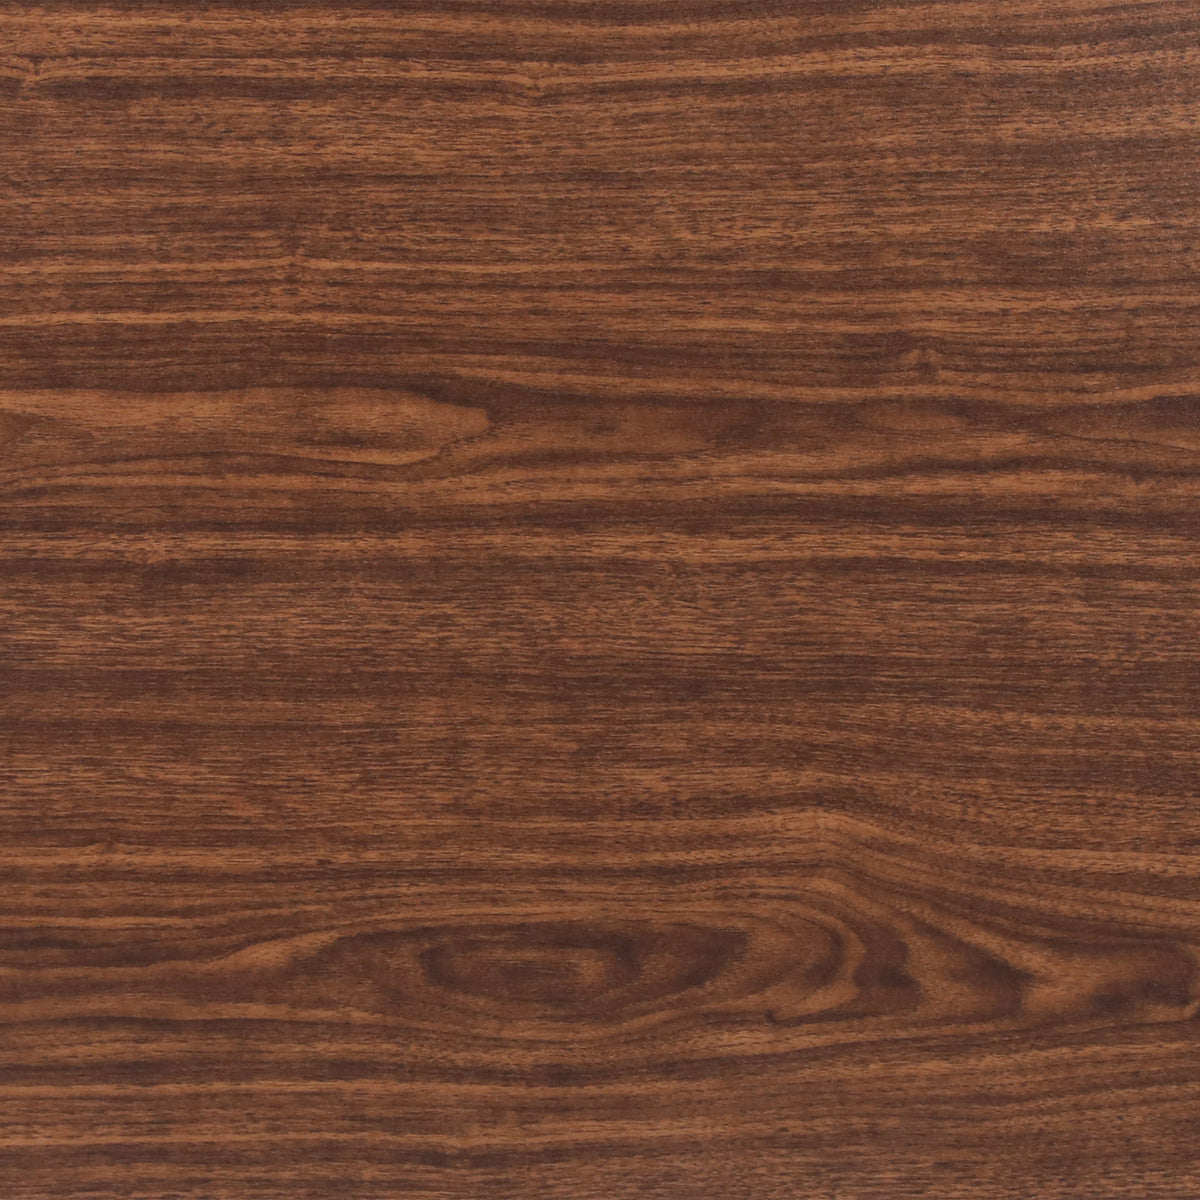 Walnut |#| Commercial 48x24 Conference Table with Laminate Top and A-Frame Base - Walnut